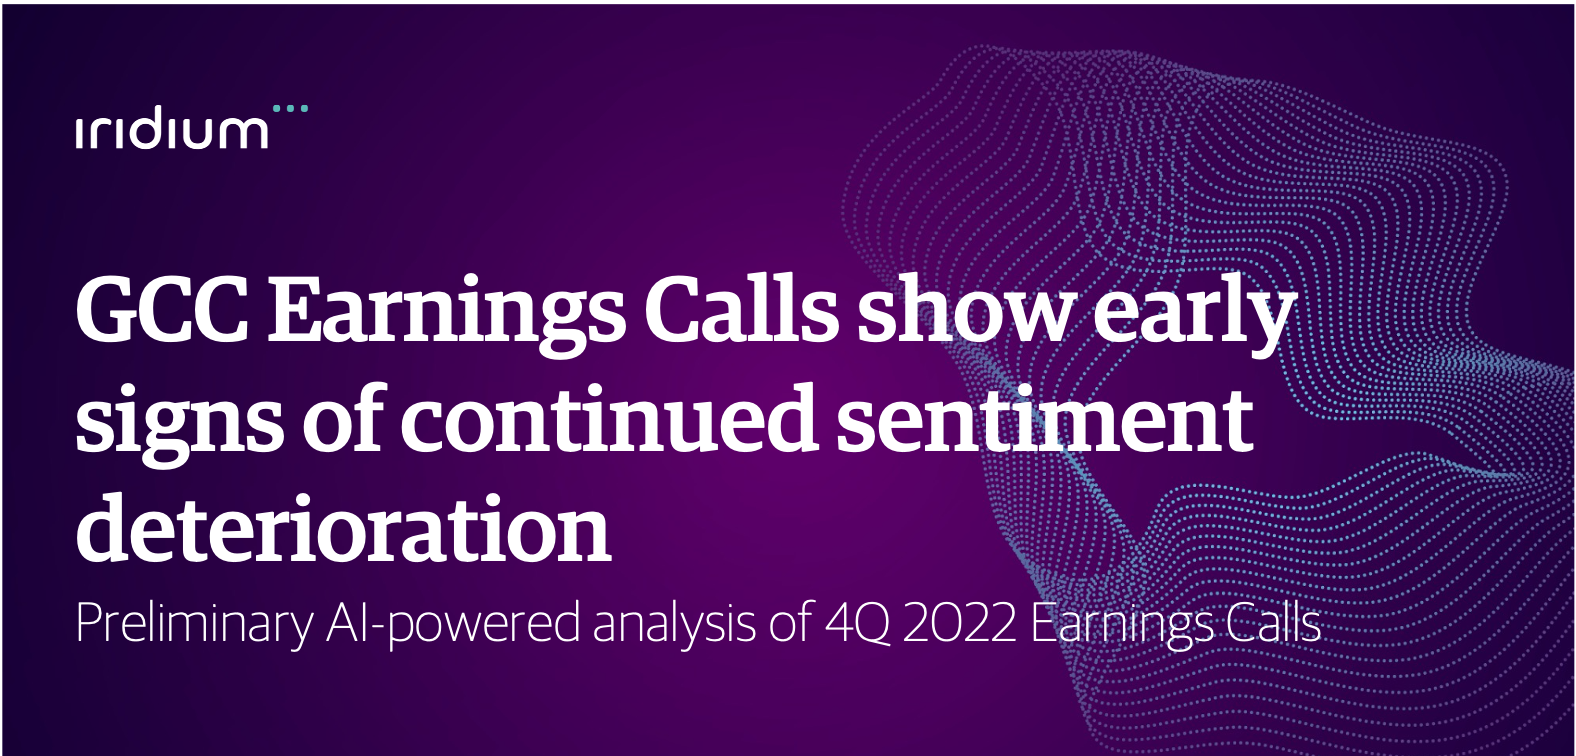 Early Insights into GCC Sentiment Trends during 4Q 2022 Earnings Cycle